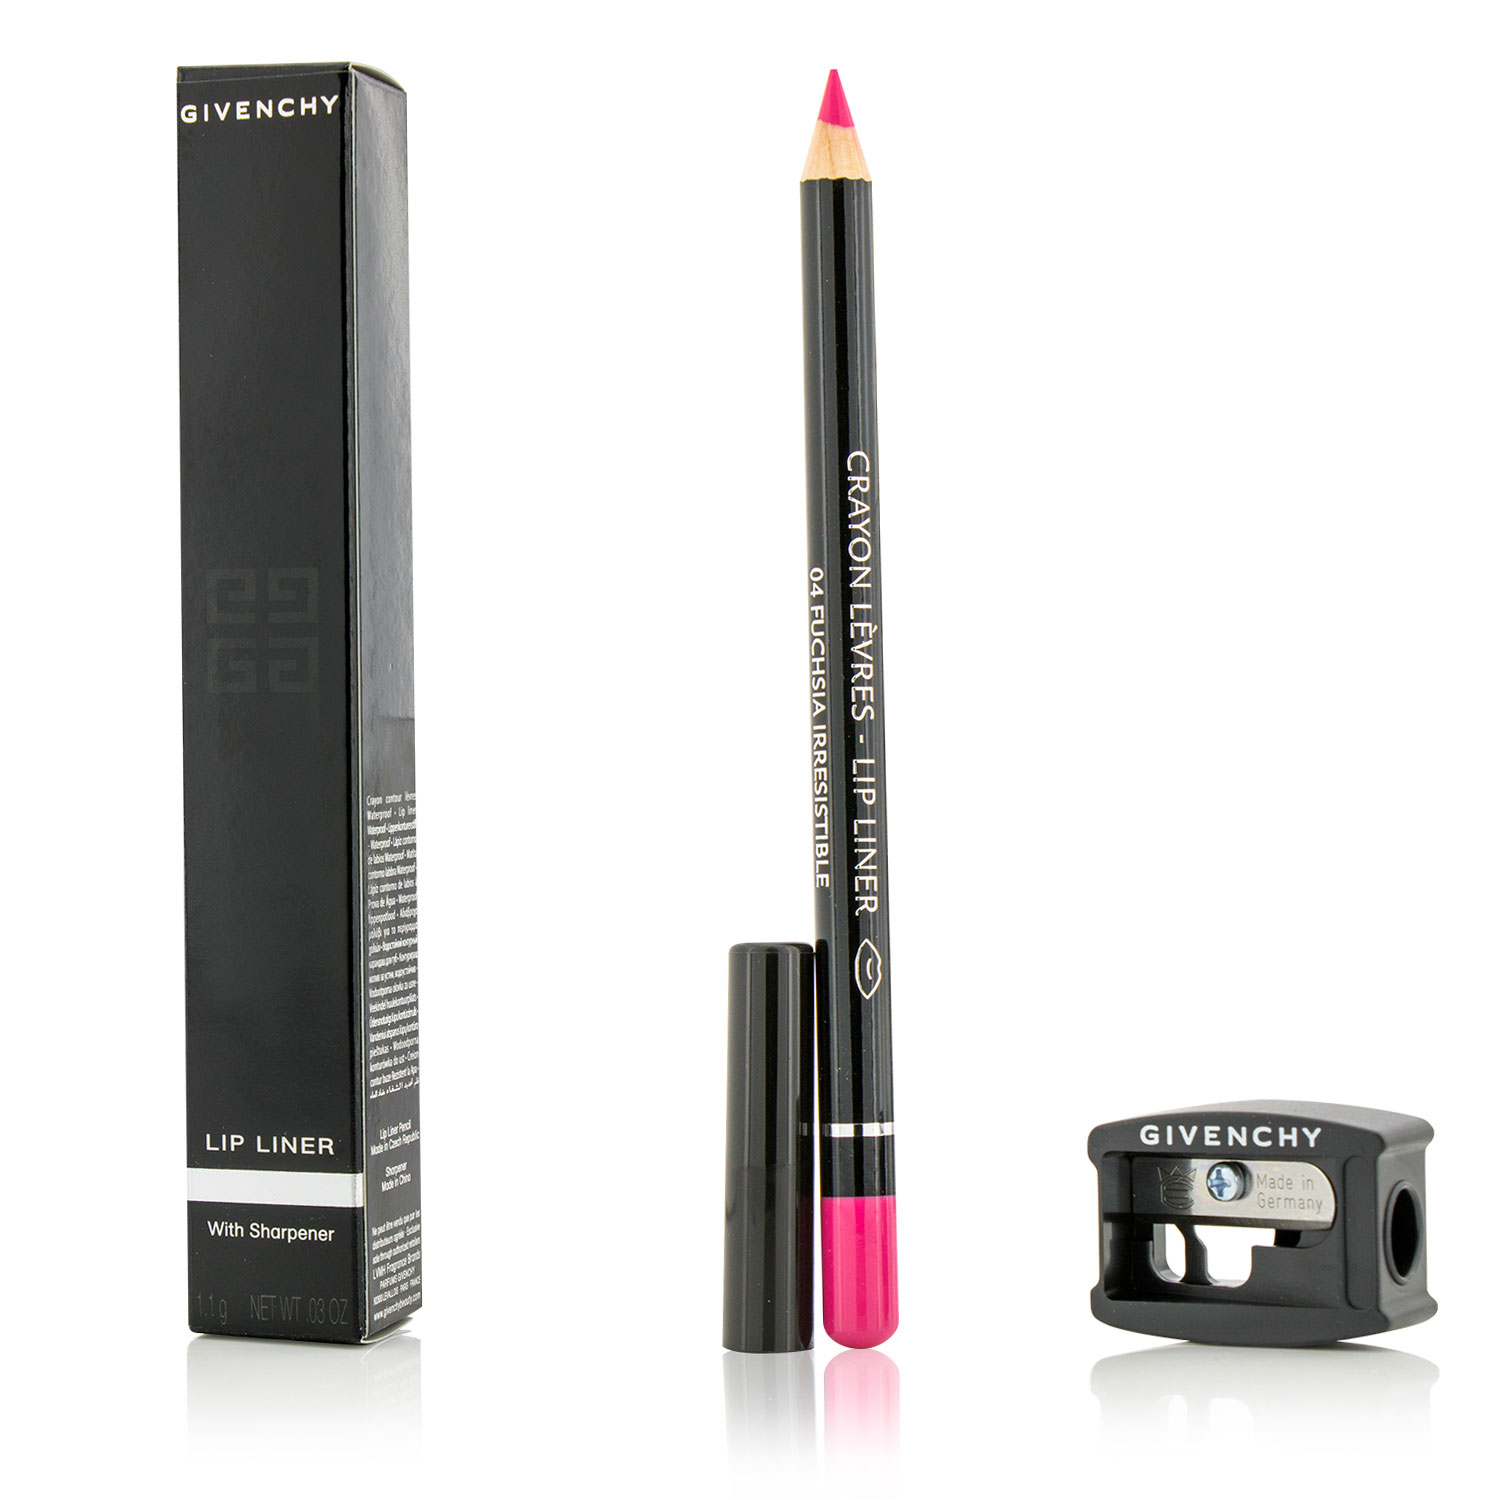 Lip Liner (With Sharpener) - # 04 Fuchsia Irresistible Givenchy Image